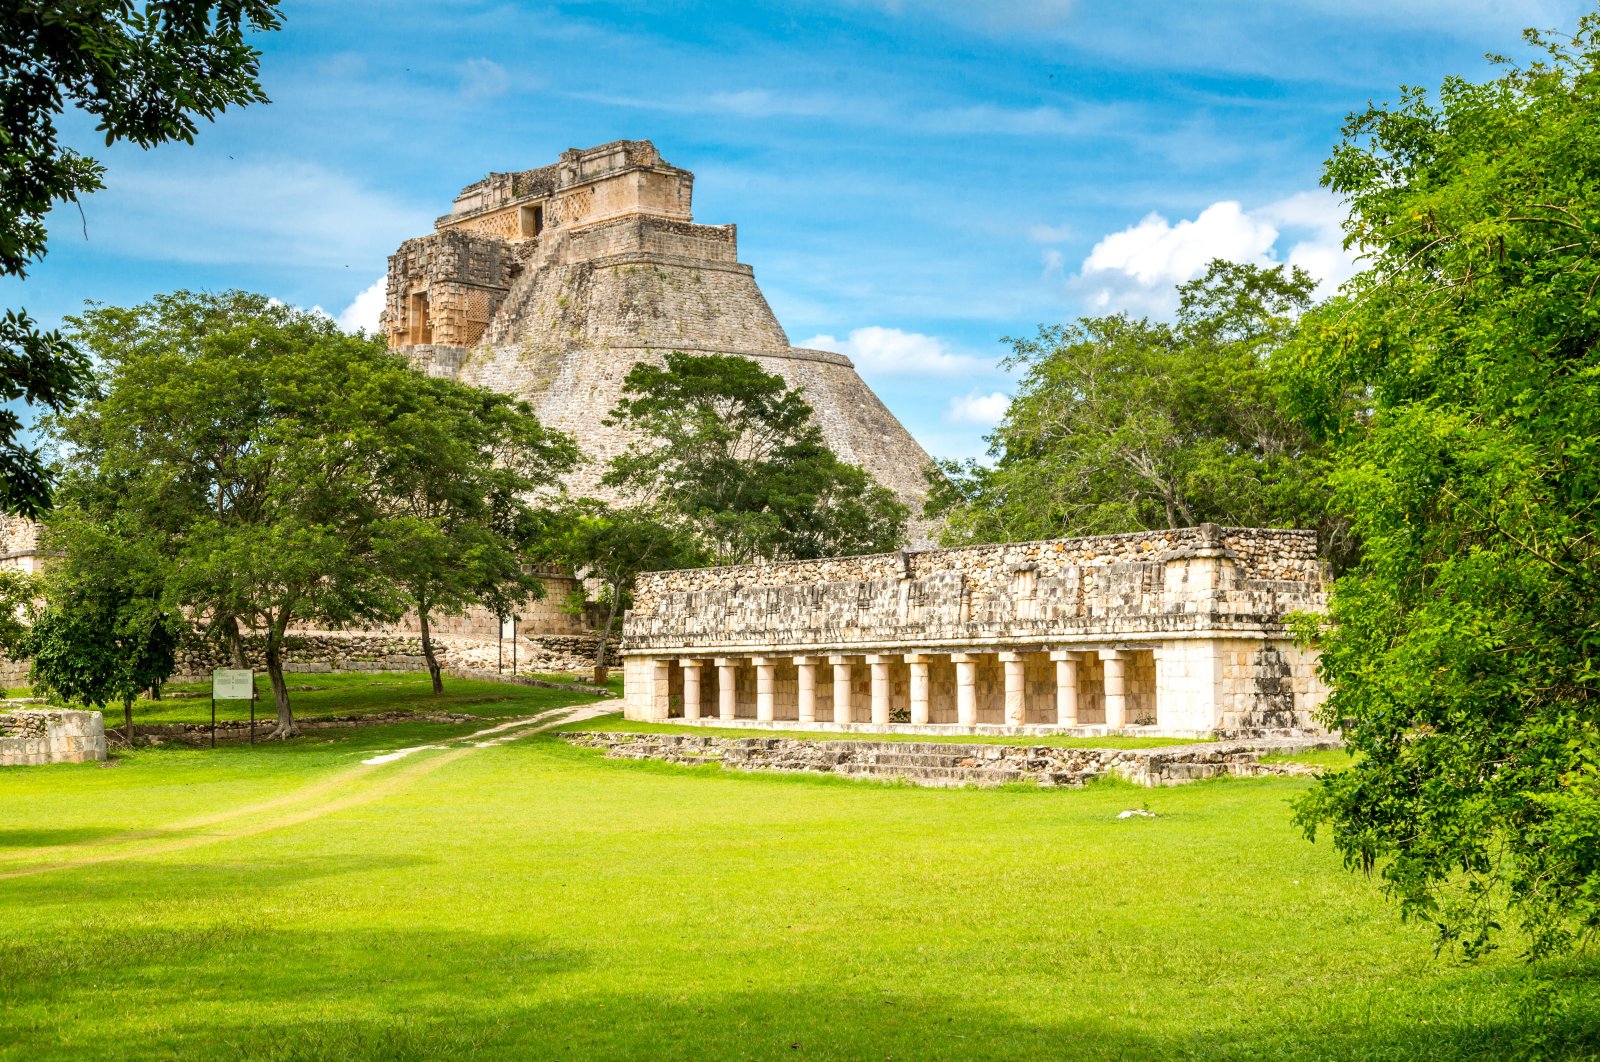 A landscape view showing the ruins of Pre-Hispanic Town of Uxmal in Yucatán Peninsula, Mexico. (Photo by Gettyimages)